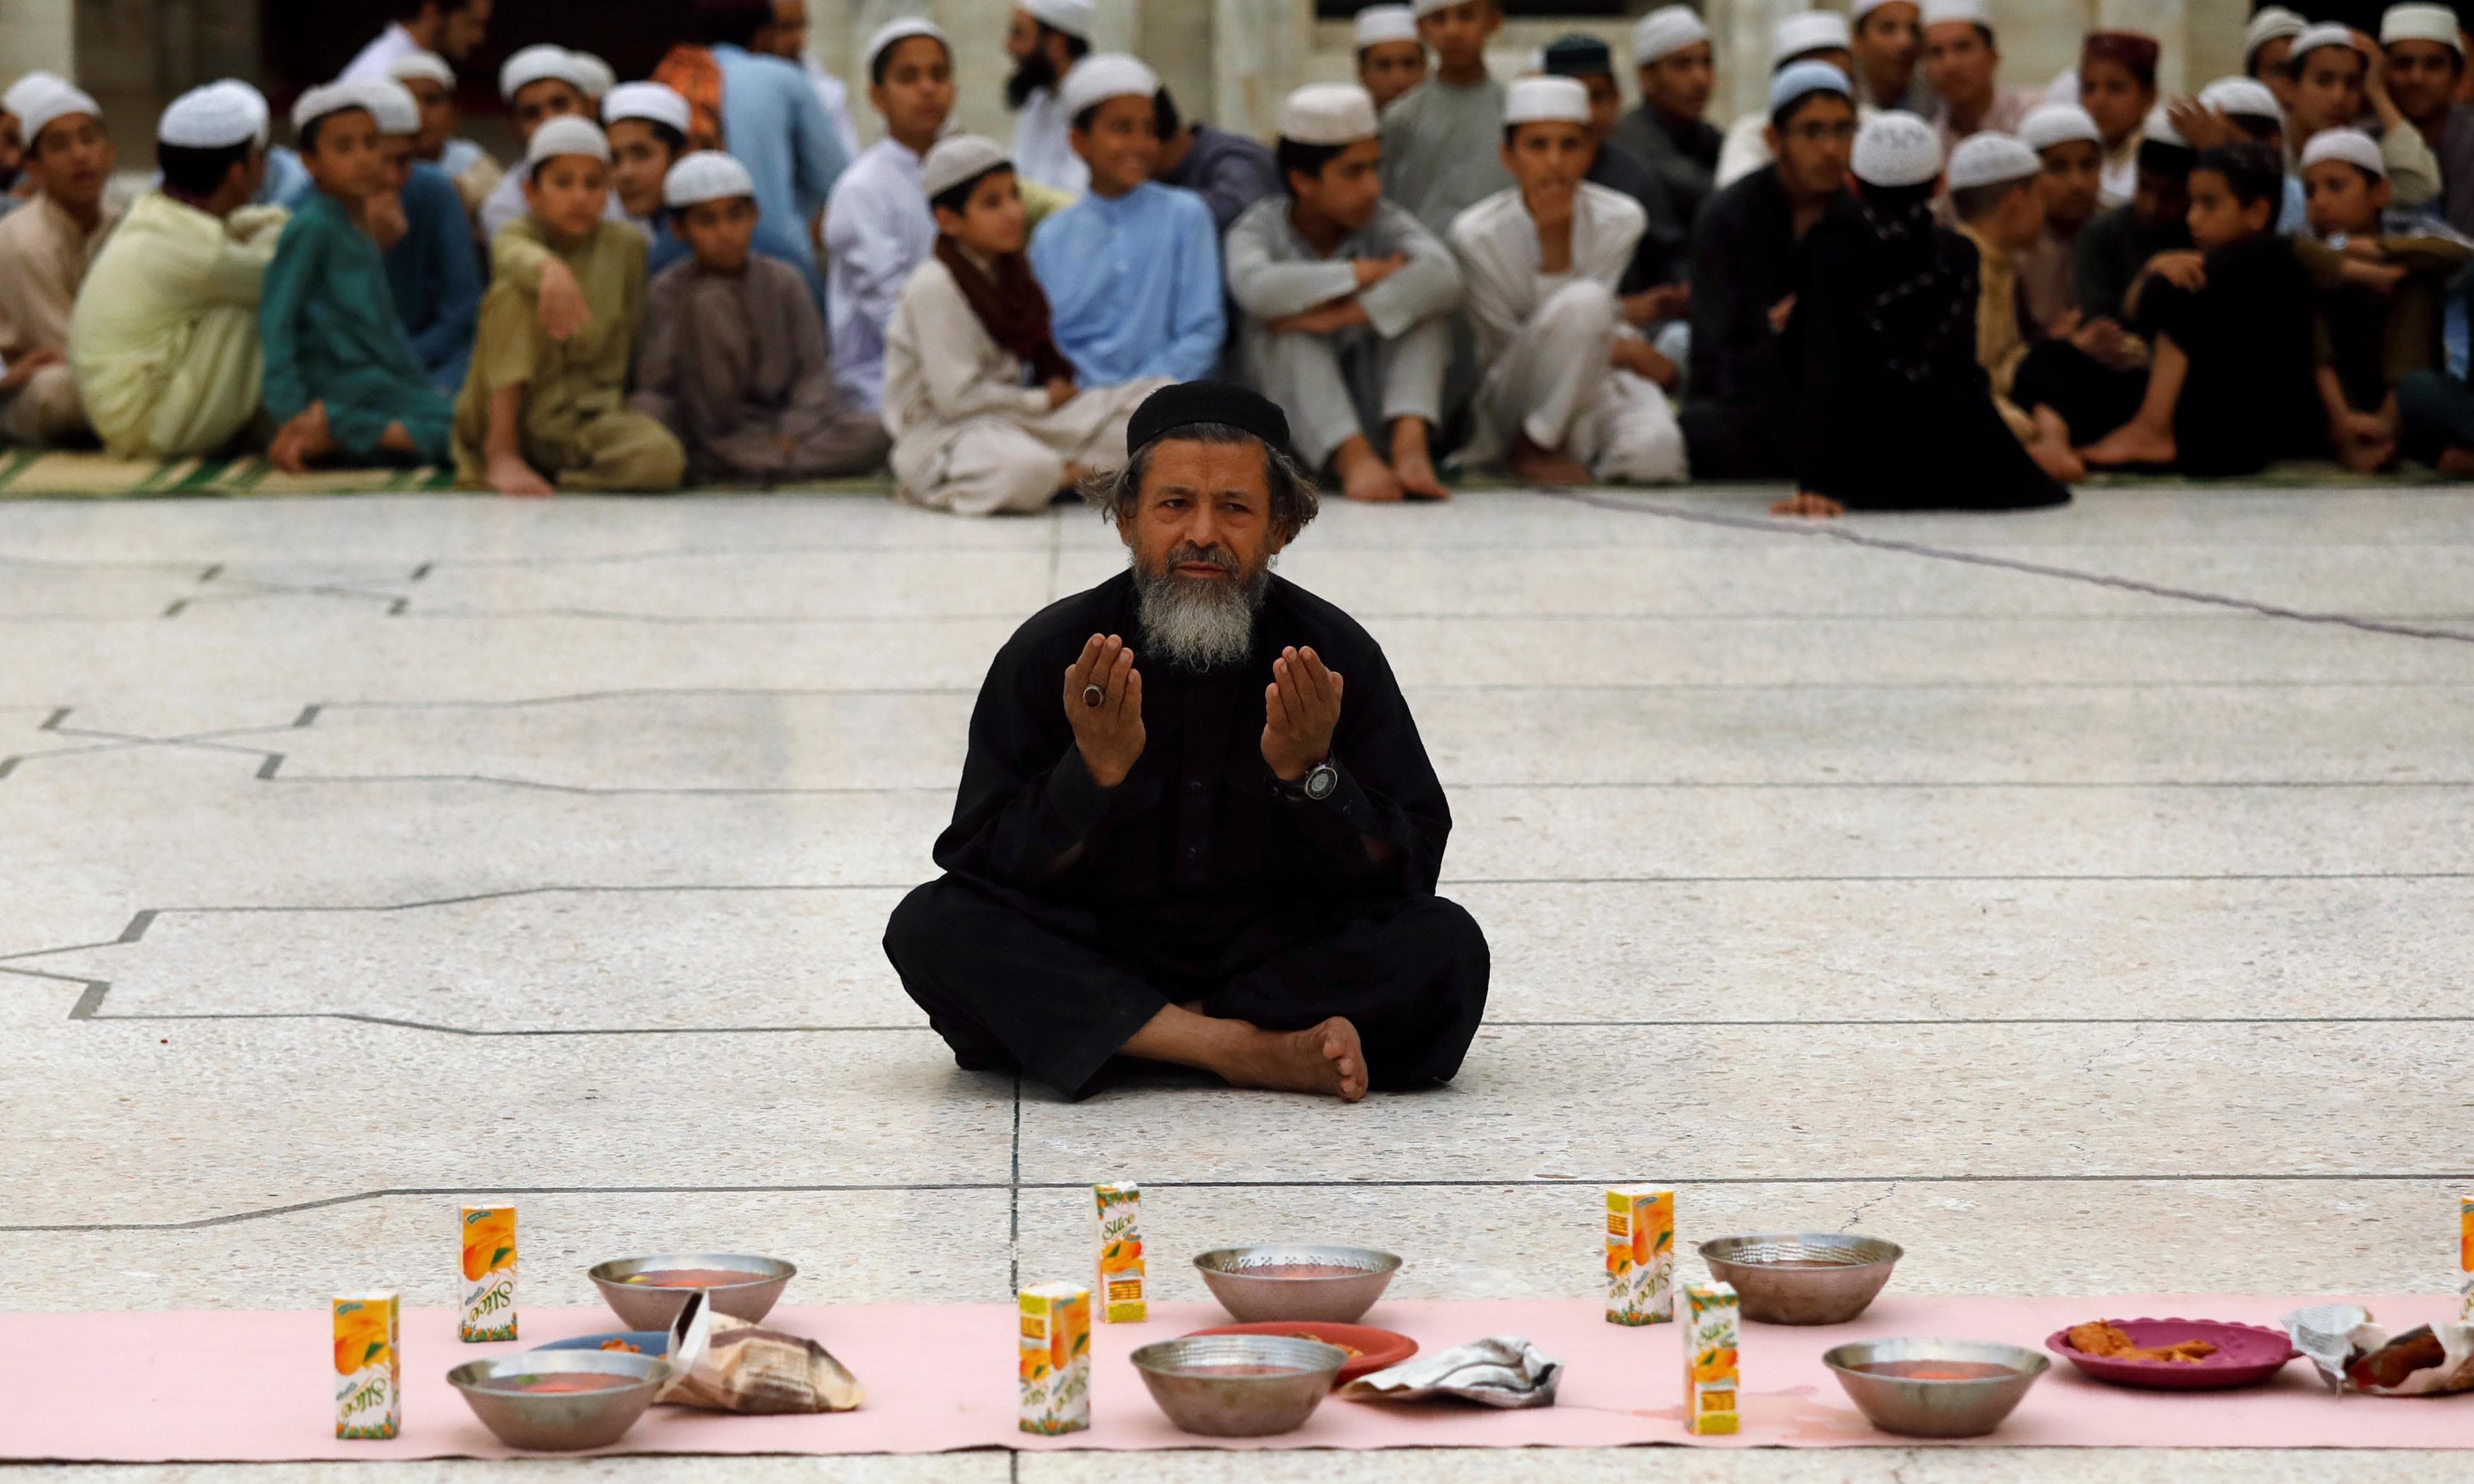 a man prays before breaking his fast during the fasting month of ramadan in peshawar pakistan may 6 2019 photo reuters